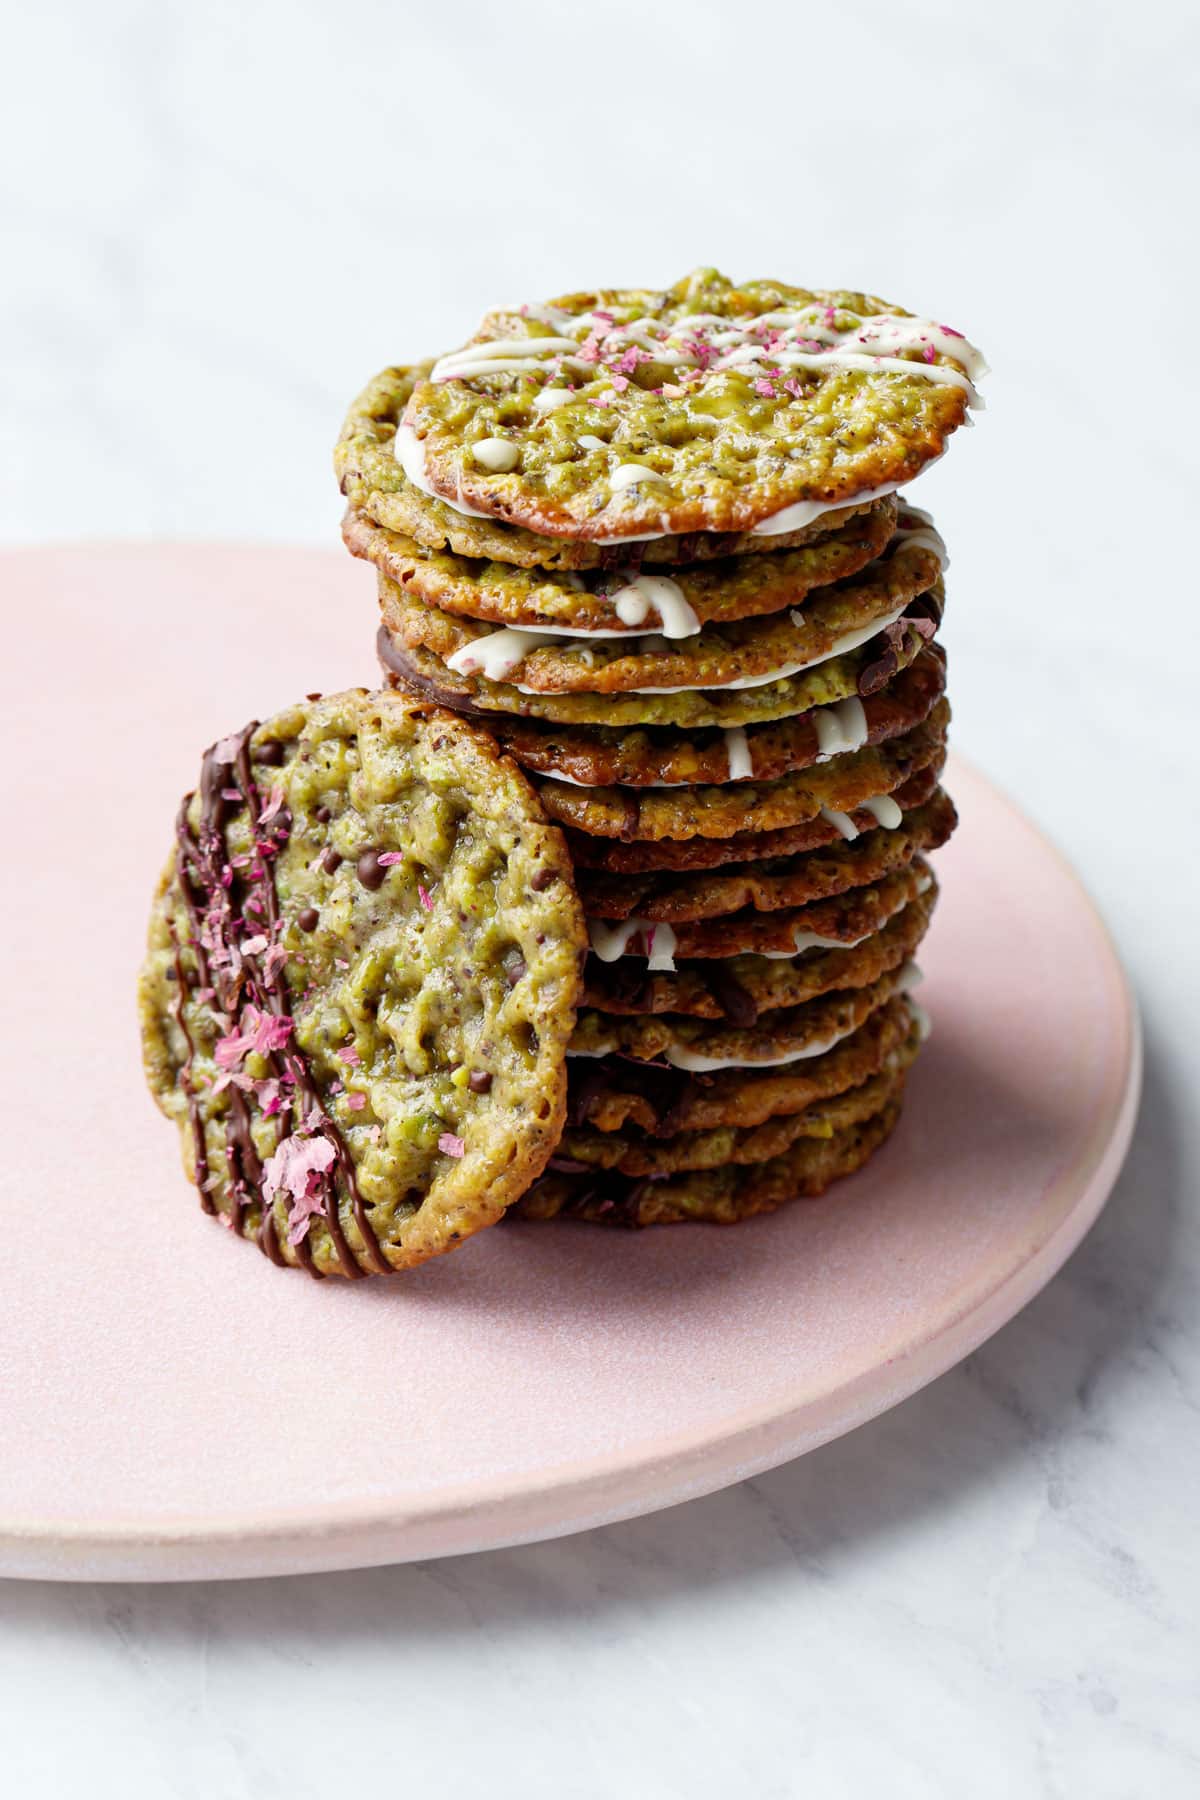 Tall off kilter stack of Pistachio Florentine Cookies on a pink plate, one cookie leaning against the side to show the decoration on top.